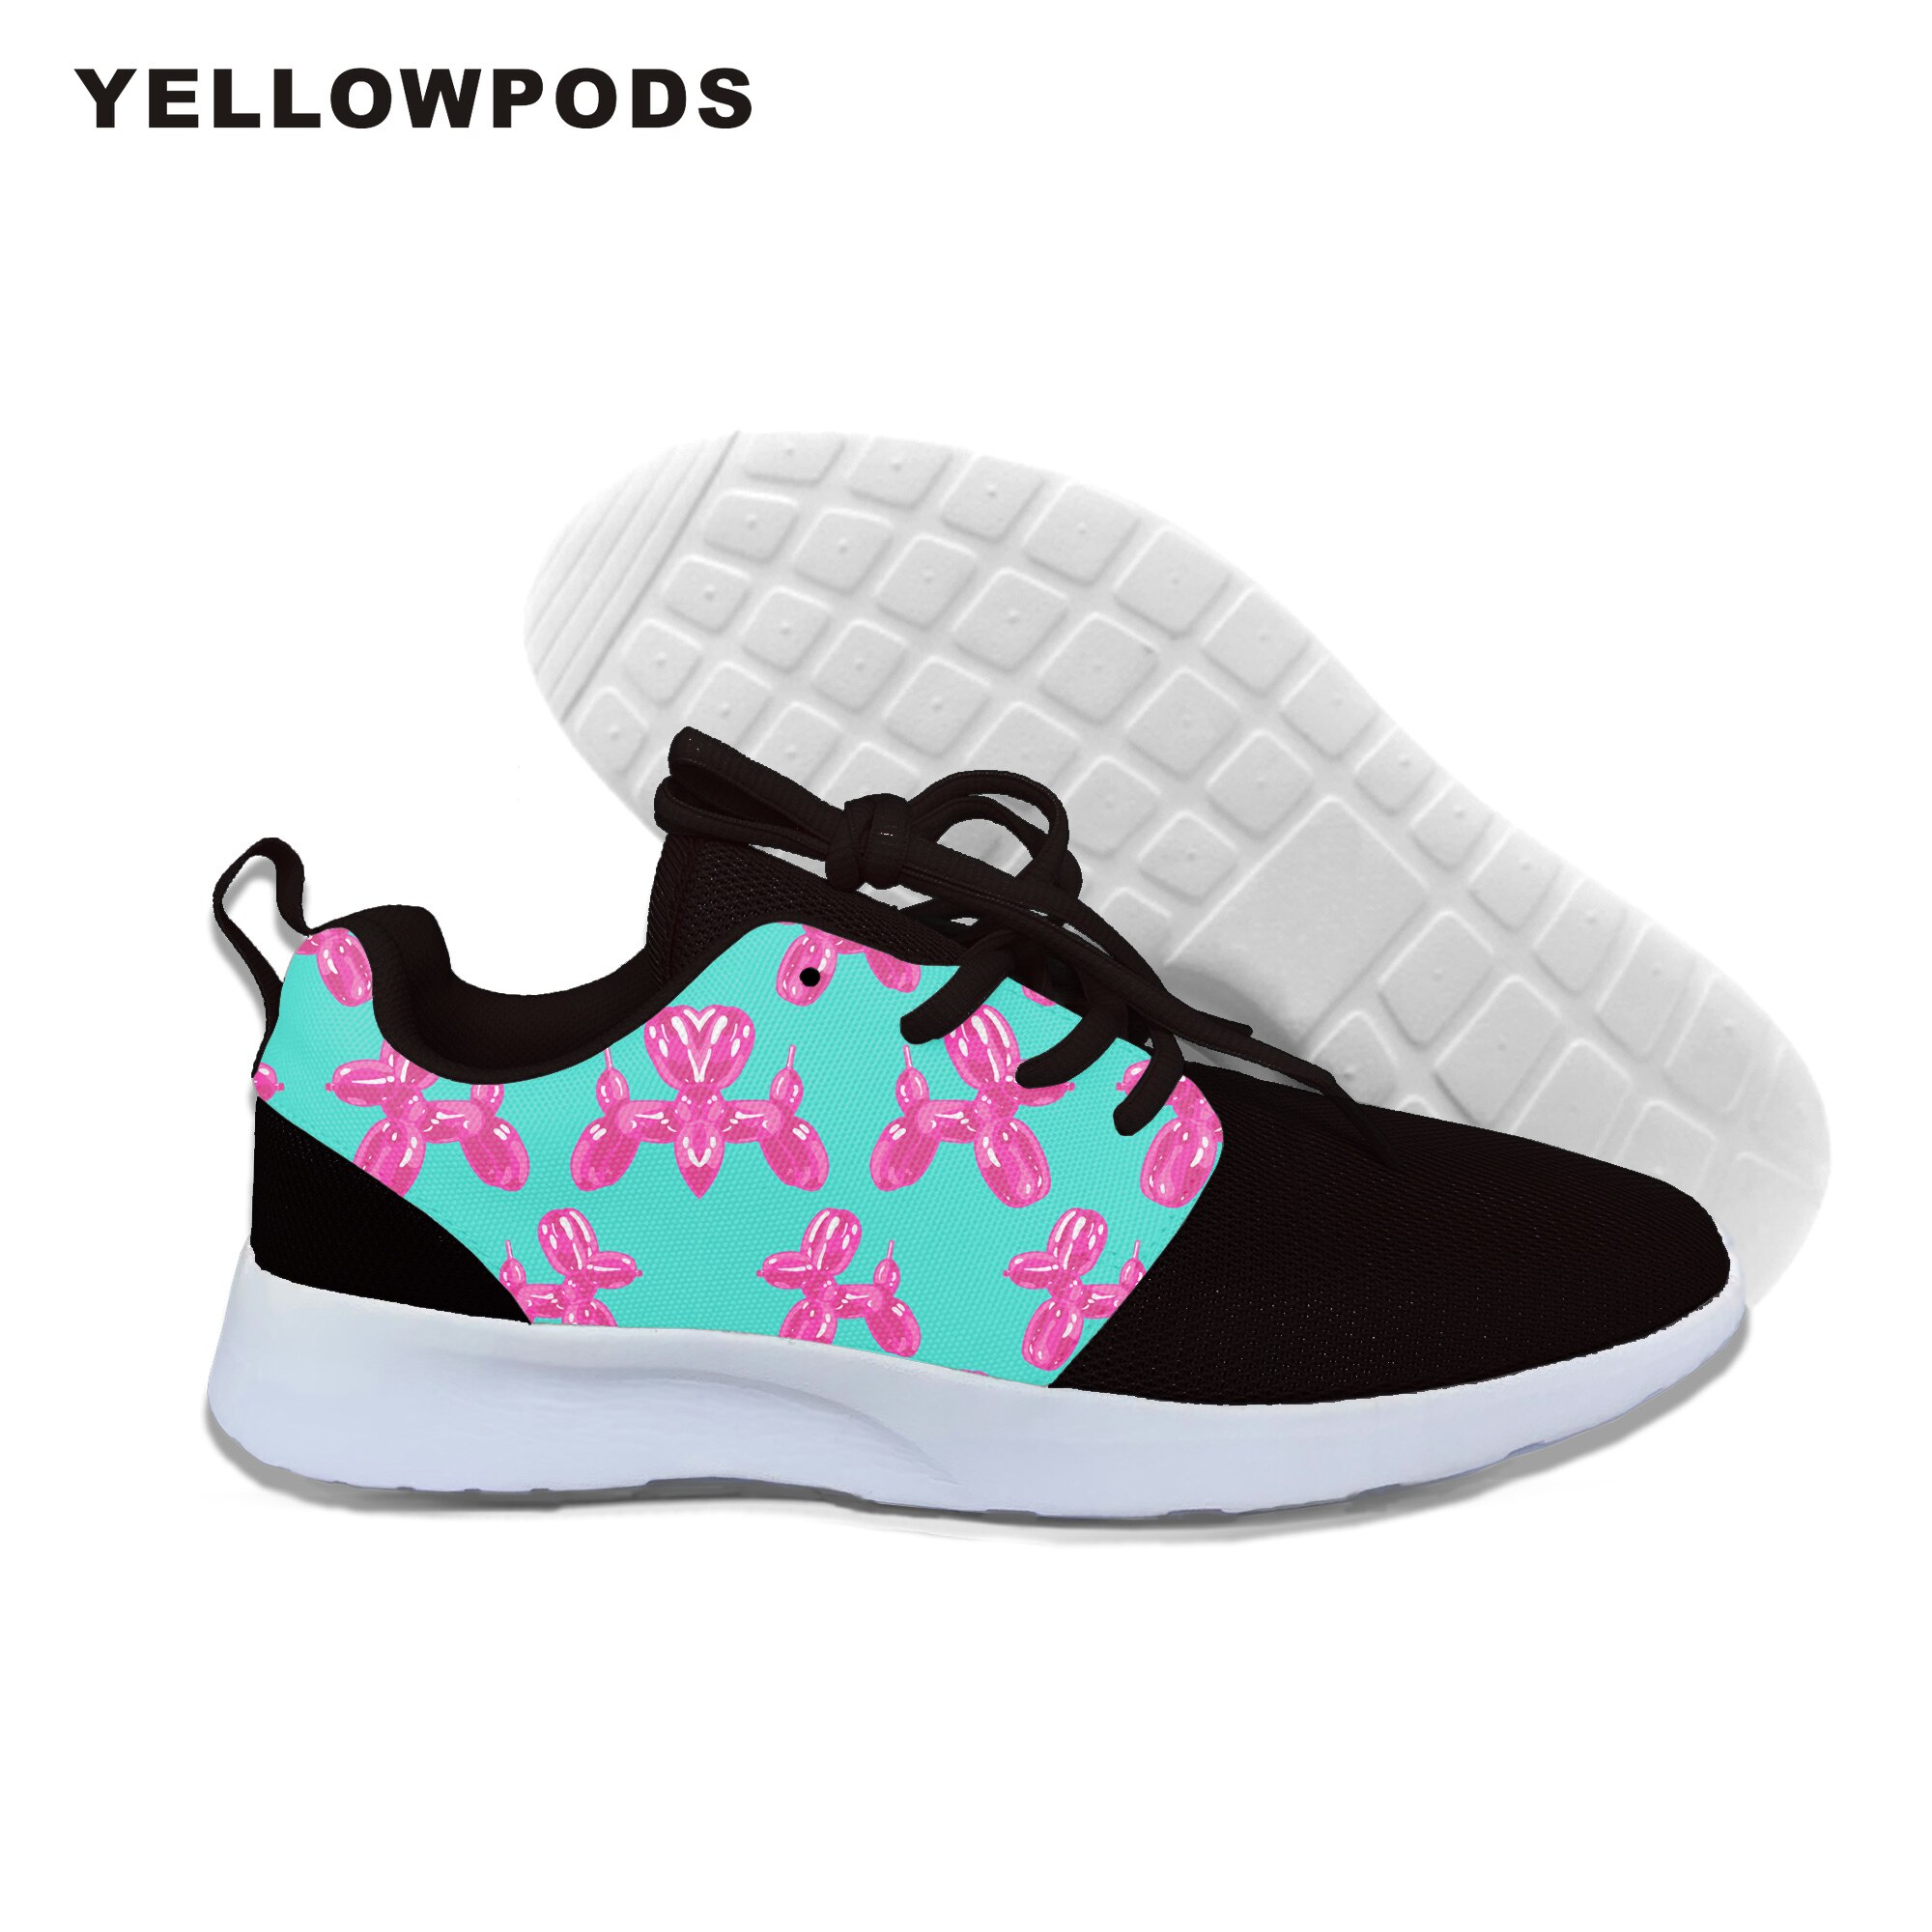 Running Shoes Men Women Hot Balloon Animal Dogs 3D For High Quality Harajuku 3D Printing Balloon Animal Dogs Sport Sneakers Shoe